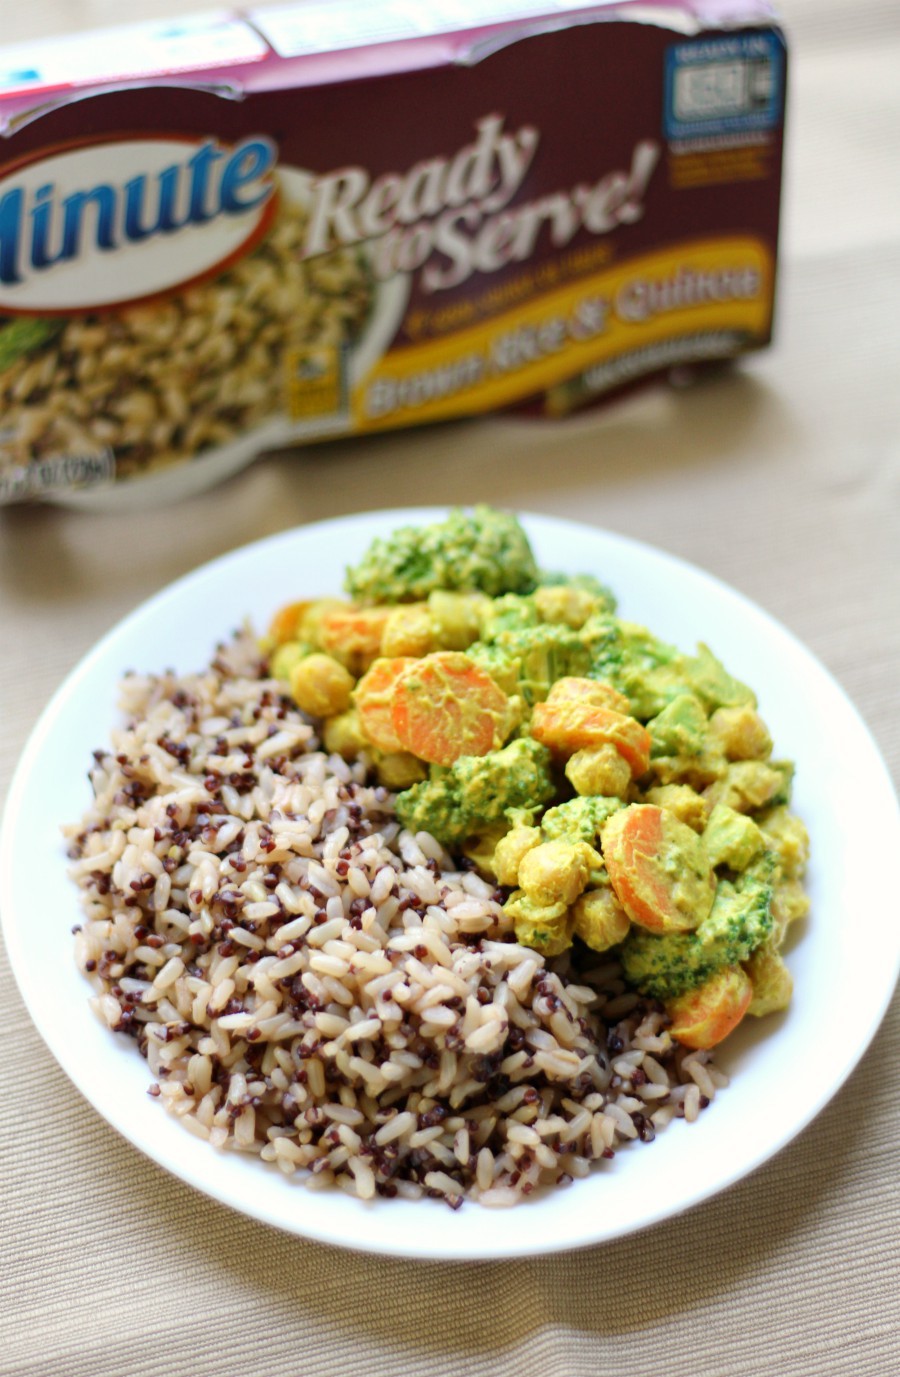 10-Minute Coconut Yogurt & Chickpea Curry (Gluten-Free, Vegan) | Strength and Sunshine @RebeccaGF666 Curry in a hurry! A quick & easy 10-Minute Coconut Yogurt & Chickpea Curry that’s loaded with veggies, is gluten-free, vegan, & top-8 allergy-free! Served with Ready to Serve Brown Rice & Quinoa cups, this recipe makes a perfect meal for two or prepped for make-ahead lunches! 